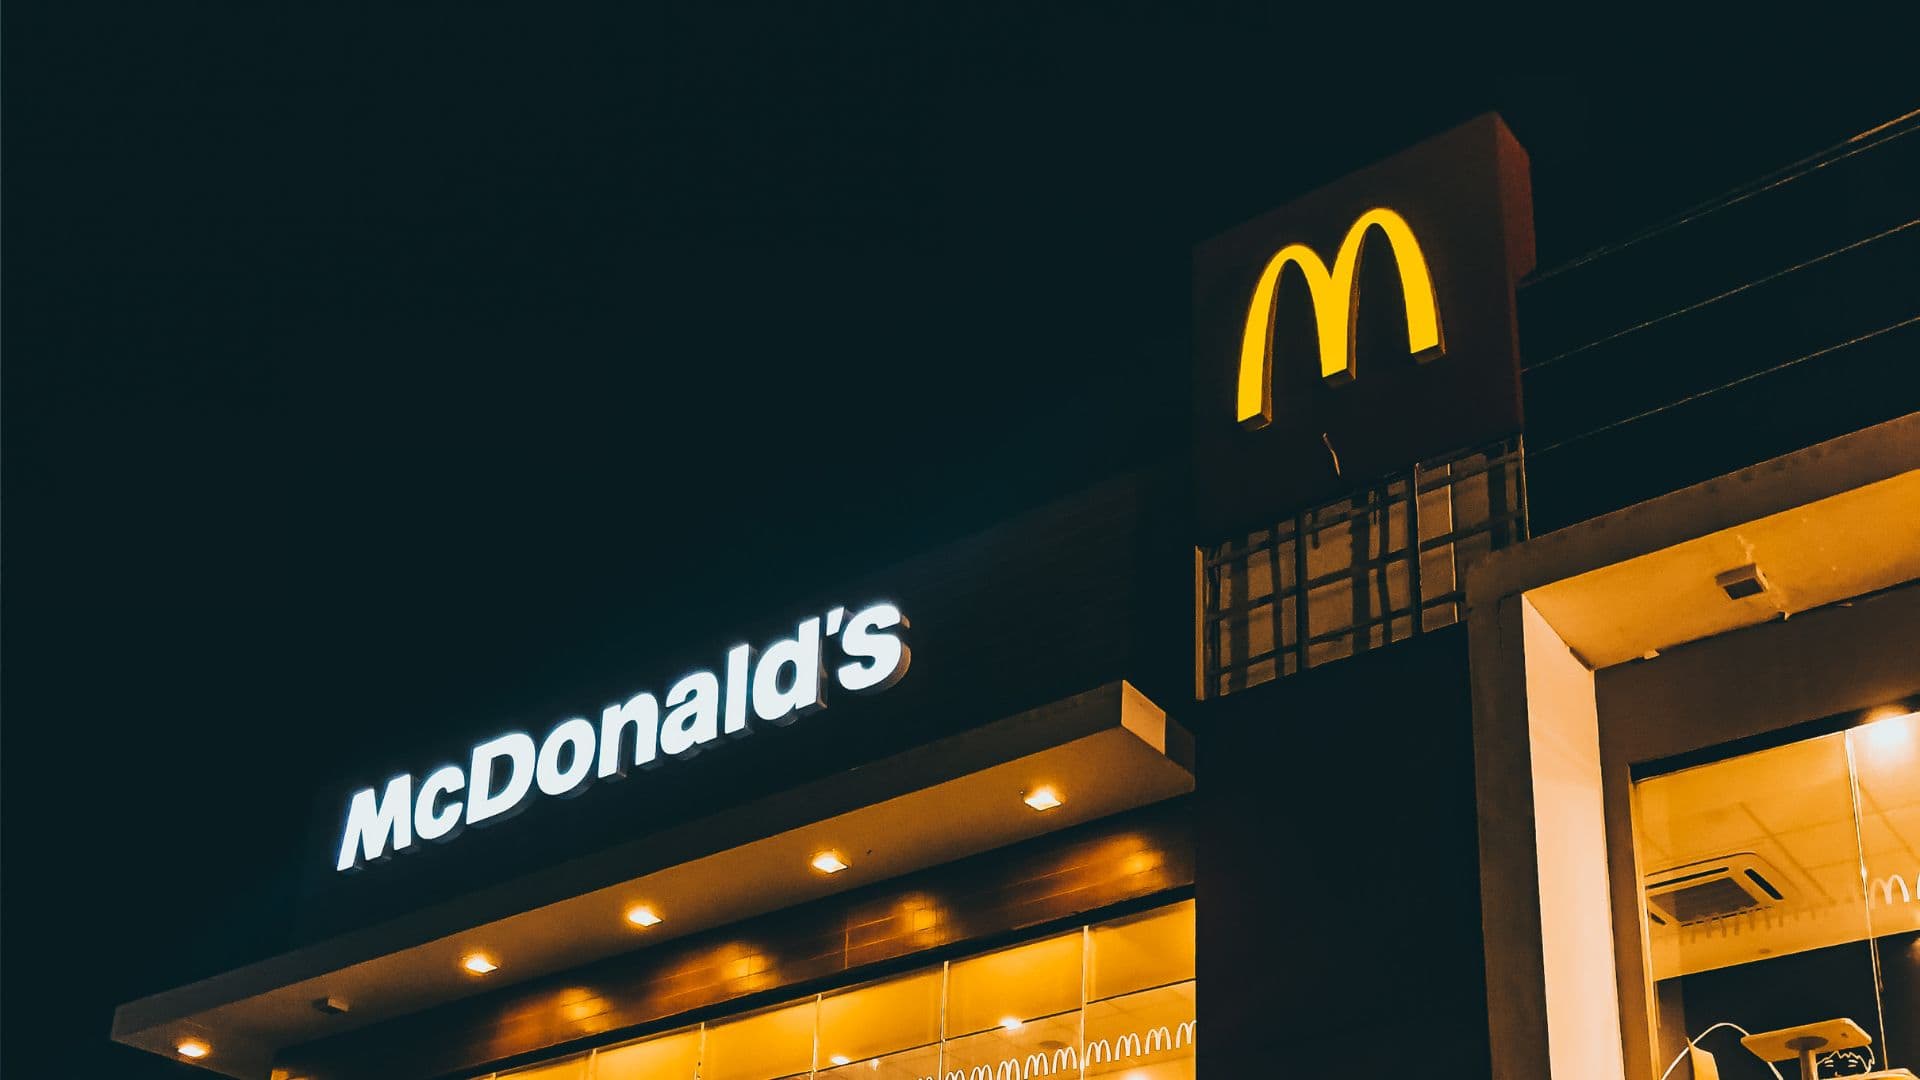 <p>If someone asked you what food chain was the largest, you’d probably say McDonald's because there’s no other way, right?</p><p>Turns out Subway has more branches than McDonalds. Sure, the second eatery may be more popular in the U.S., but if we compare internationally, at one point, Subway easily trumped McDonald's with around 44000 branches across 110 countries. That’s quite an impressive feat.</p>